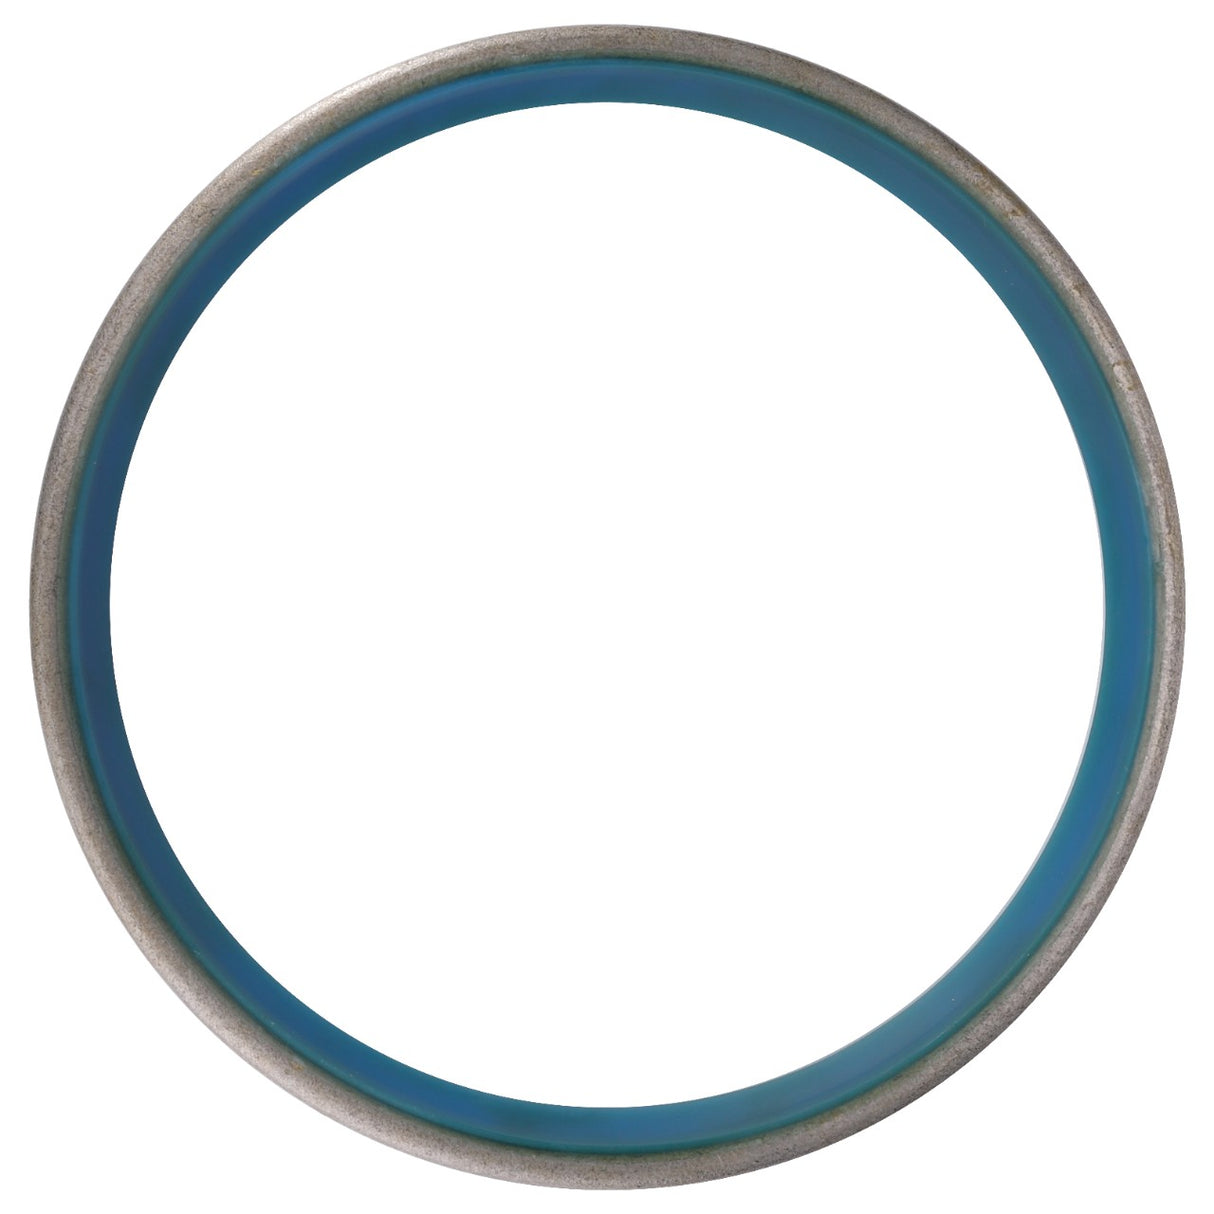 AGCO | Gasket, Front Axle - 3713929M1 - Farming Parts